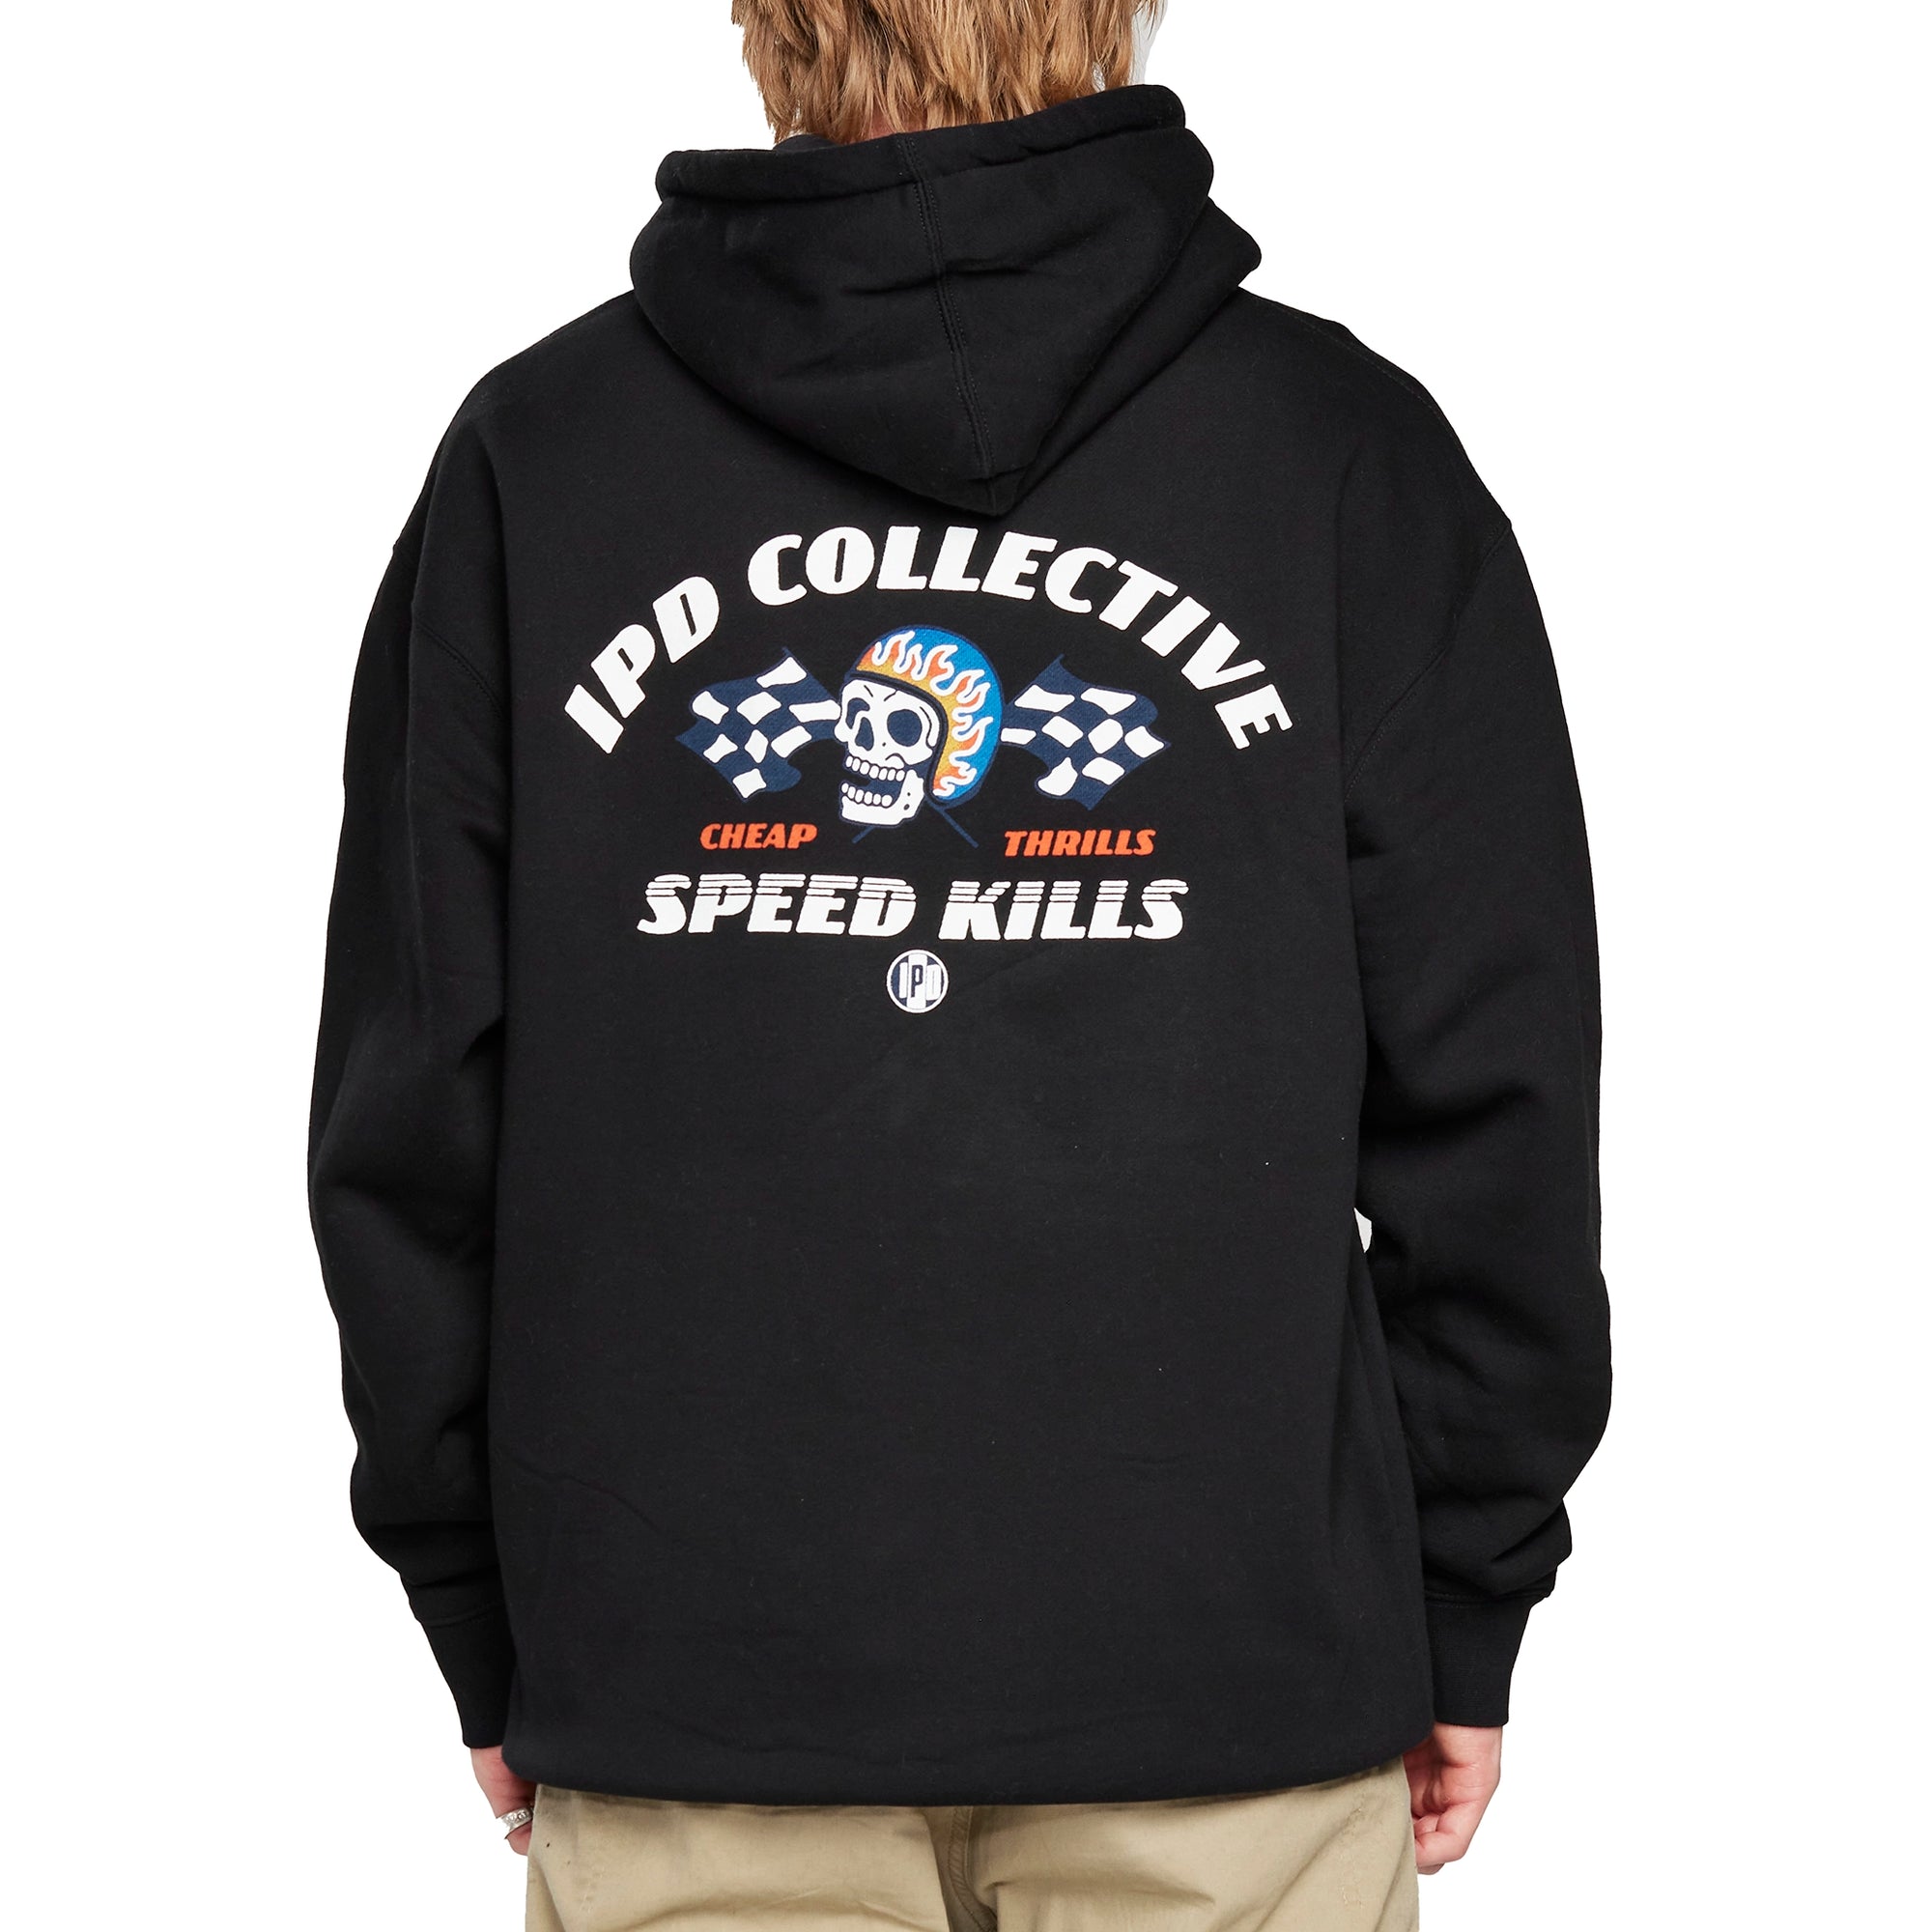 Back view of a white loose fitting fleece hoodie with a large print of a skull wearing a light blue racing helmet with flames in between two checkered flags with the words I P D Collective arching above and the words Cheap Thrills and Speed Kills below.